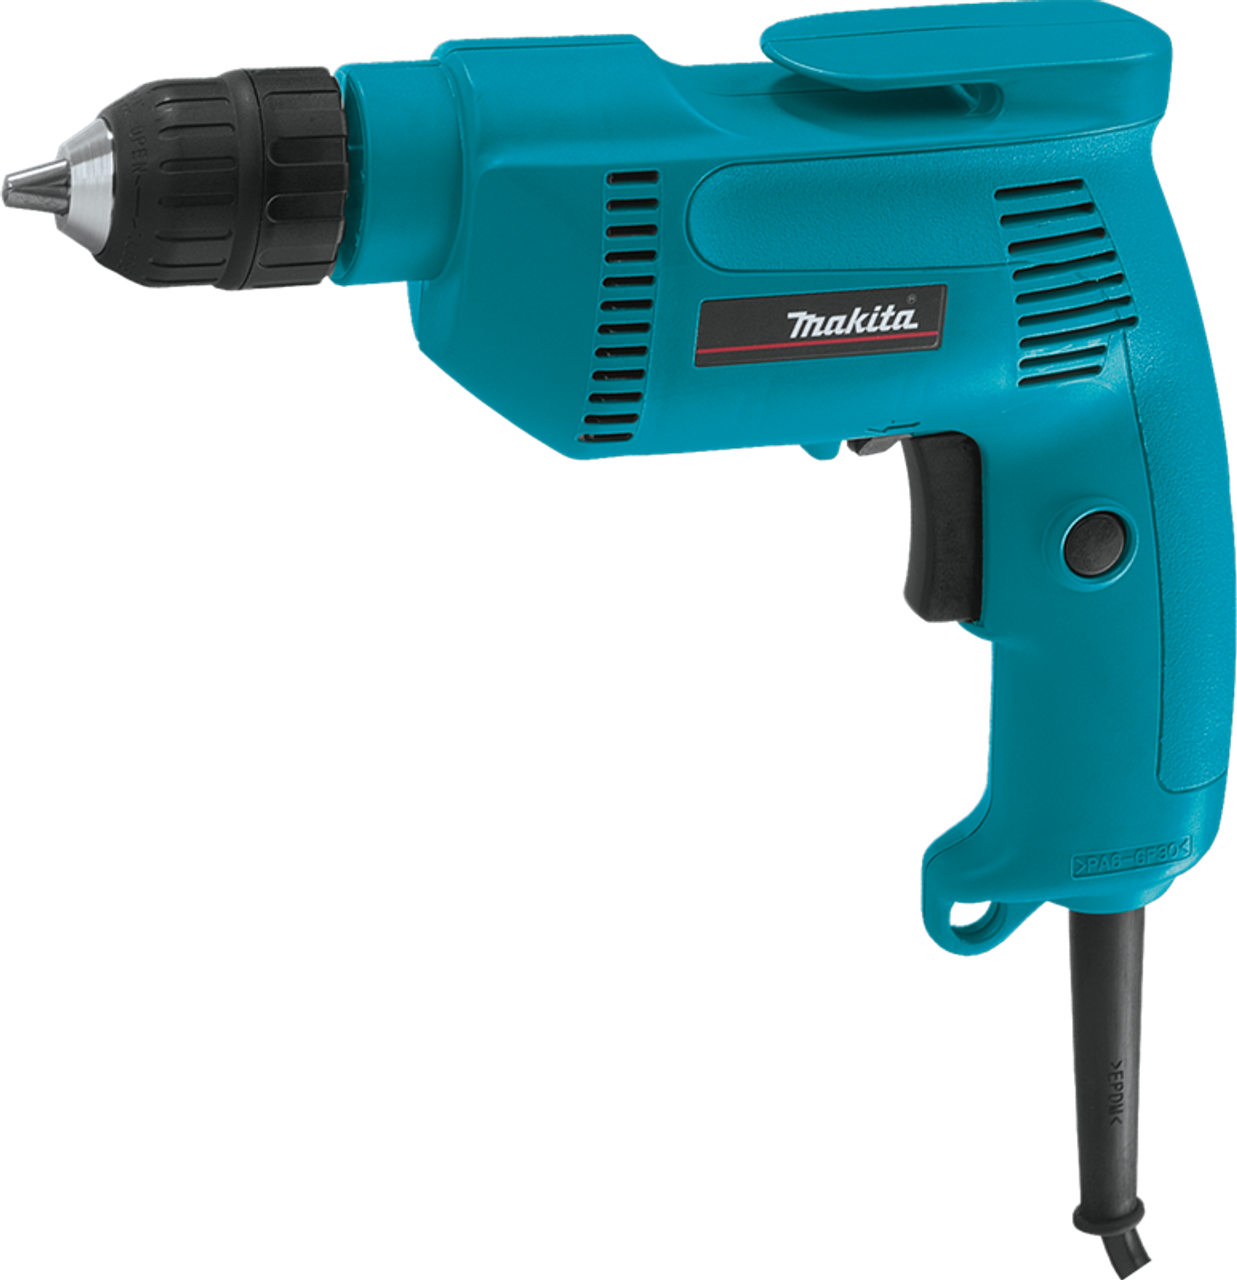 3/8" Drill, Variable speed (0 - 2,500 RPM), 6408